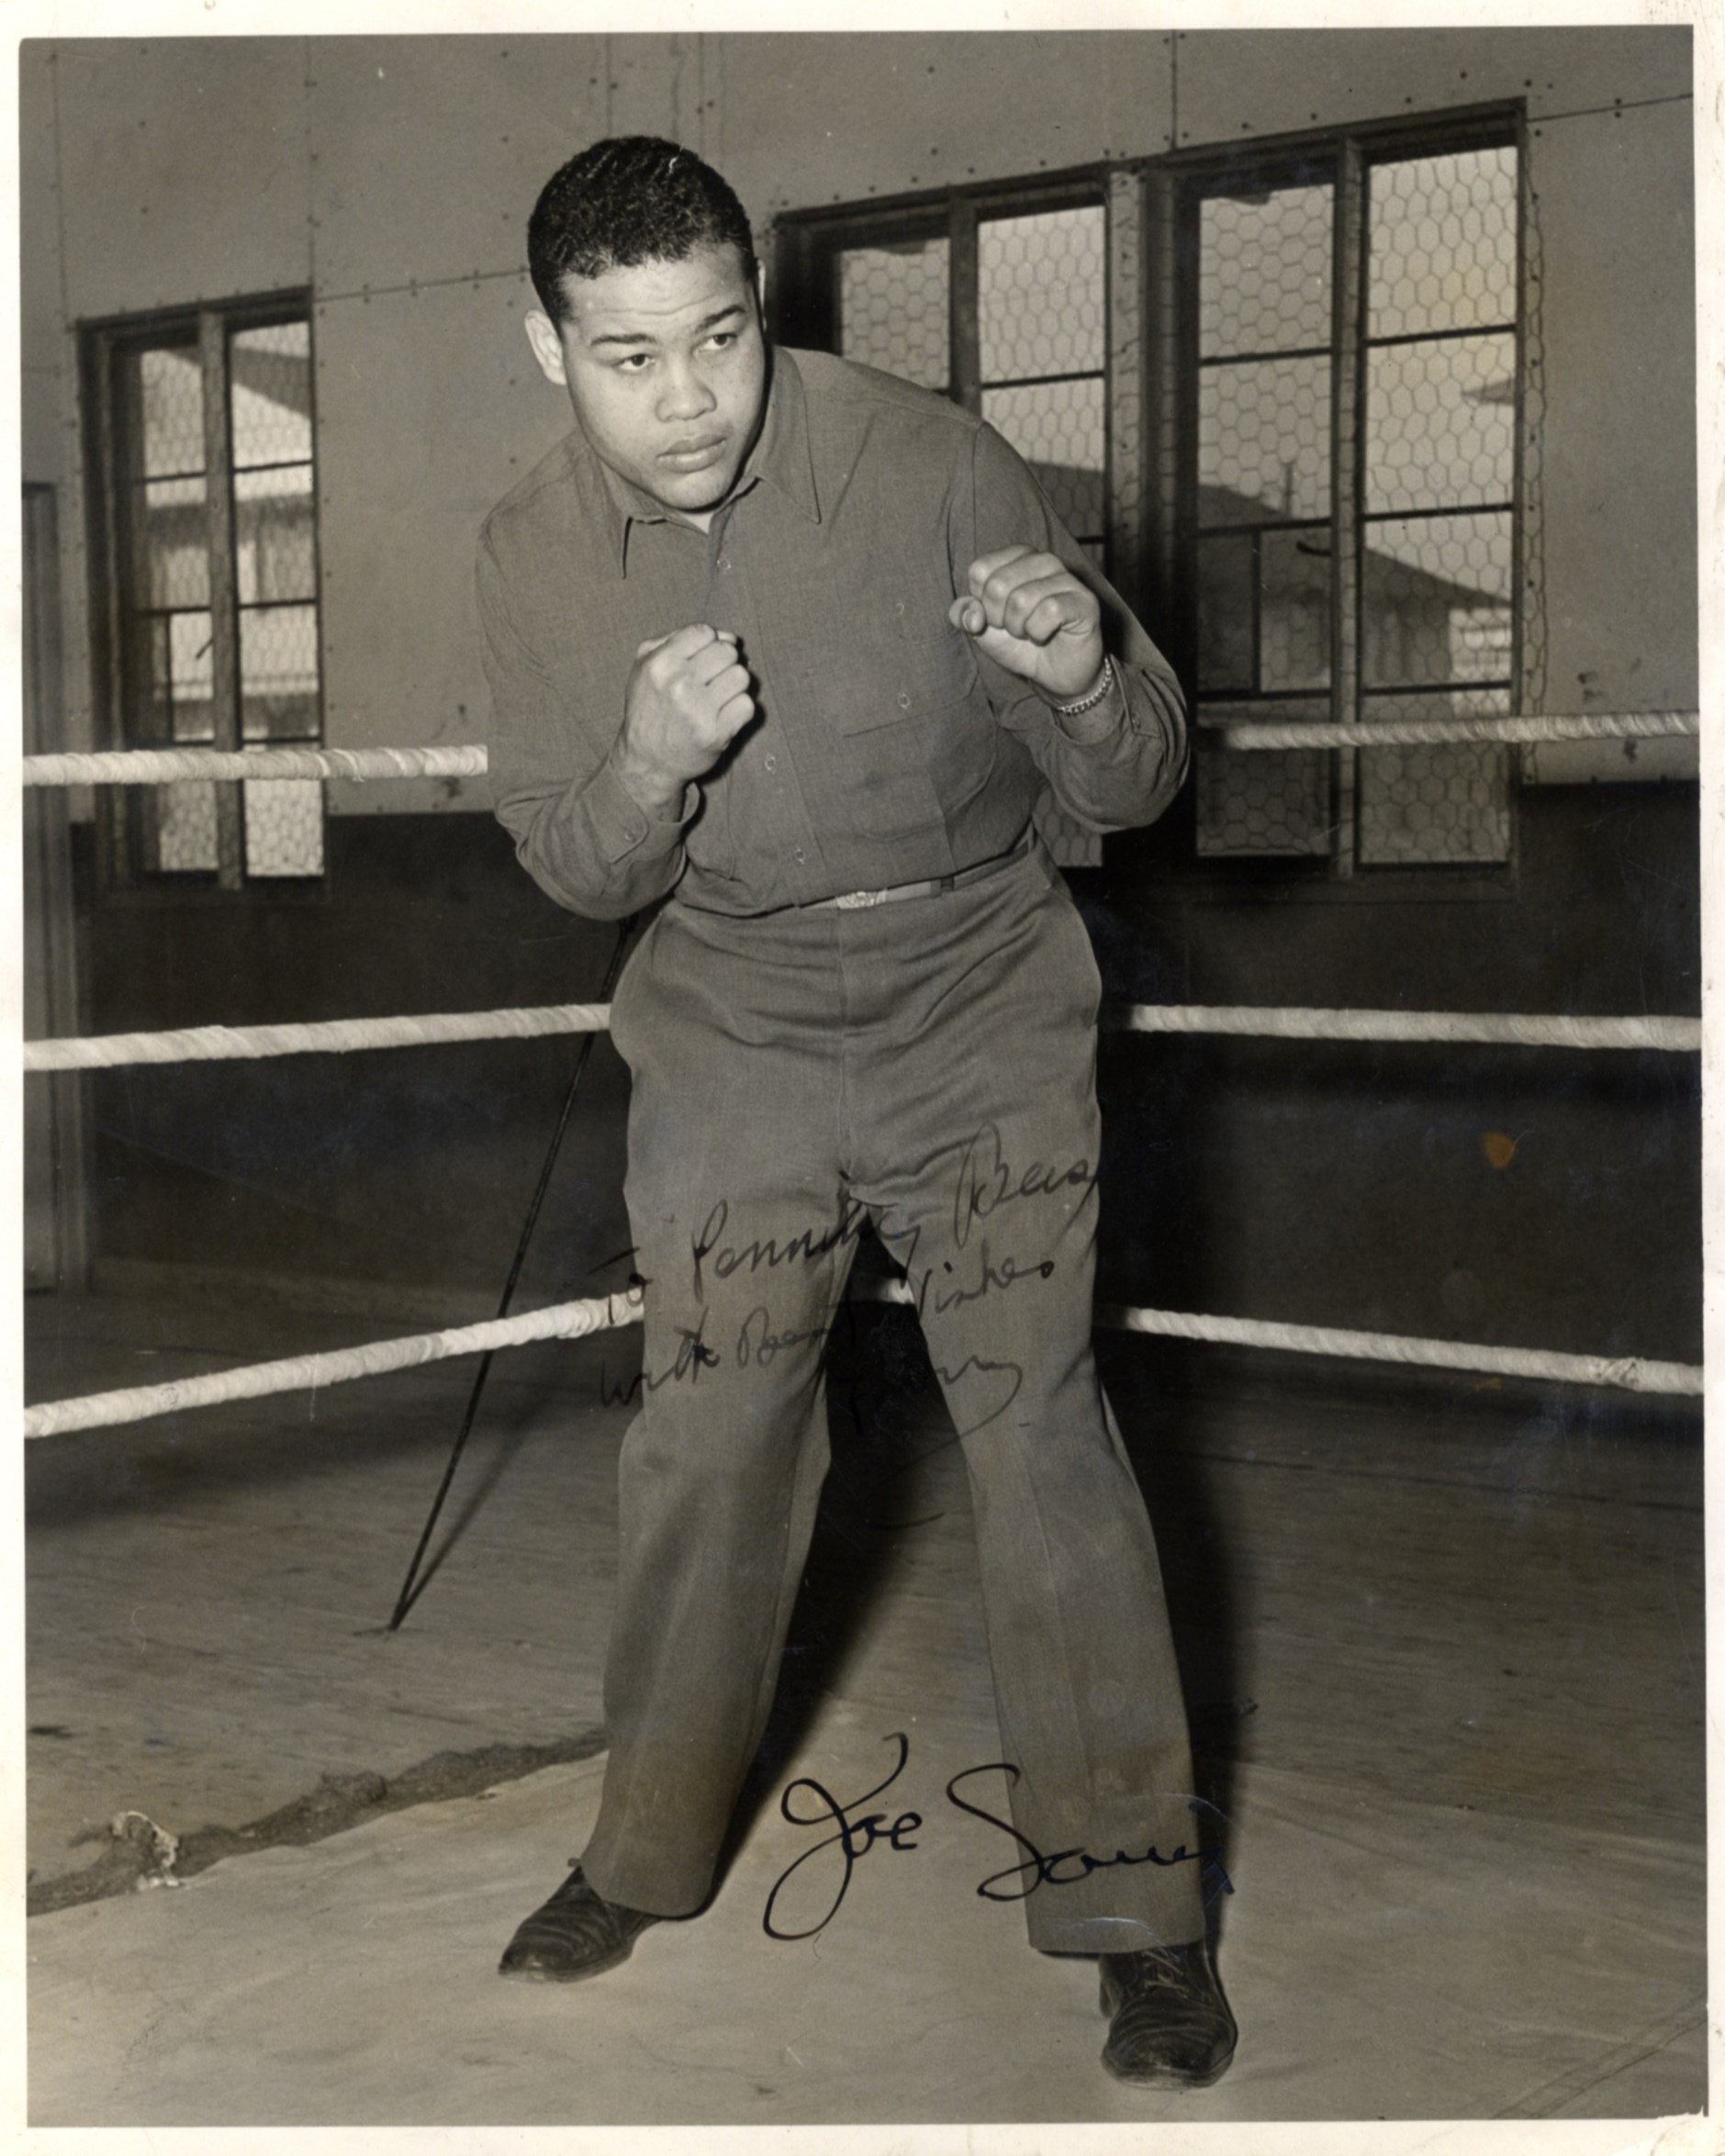 LOUIS JOE: (1914-1981) American Boxer, World Heavyweight Champion 1937-49. Vintage signed and